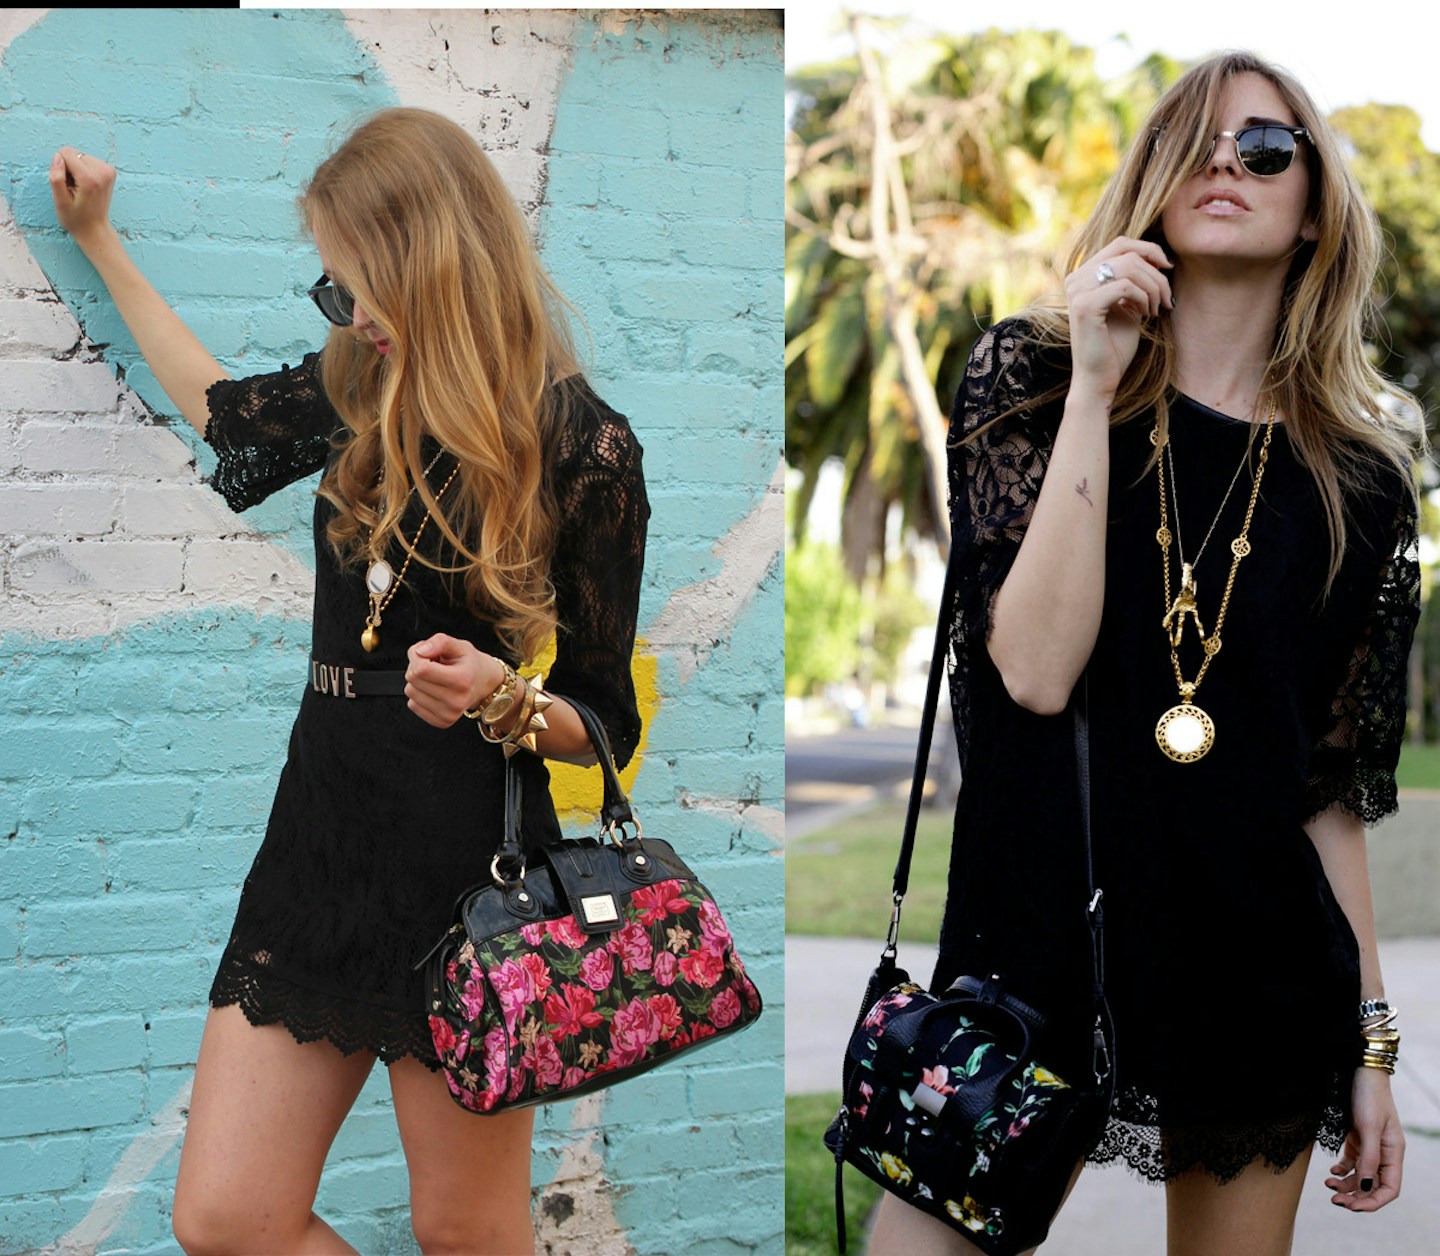 Get the Look for Less: Chiara Ferragni of the Blonde Salad